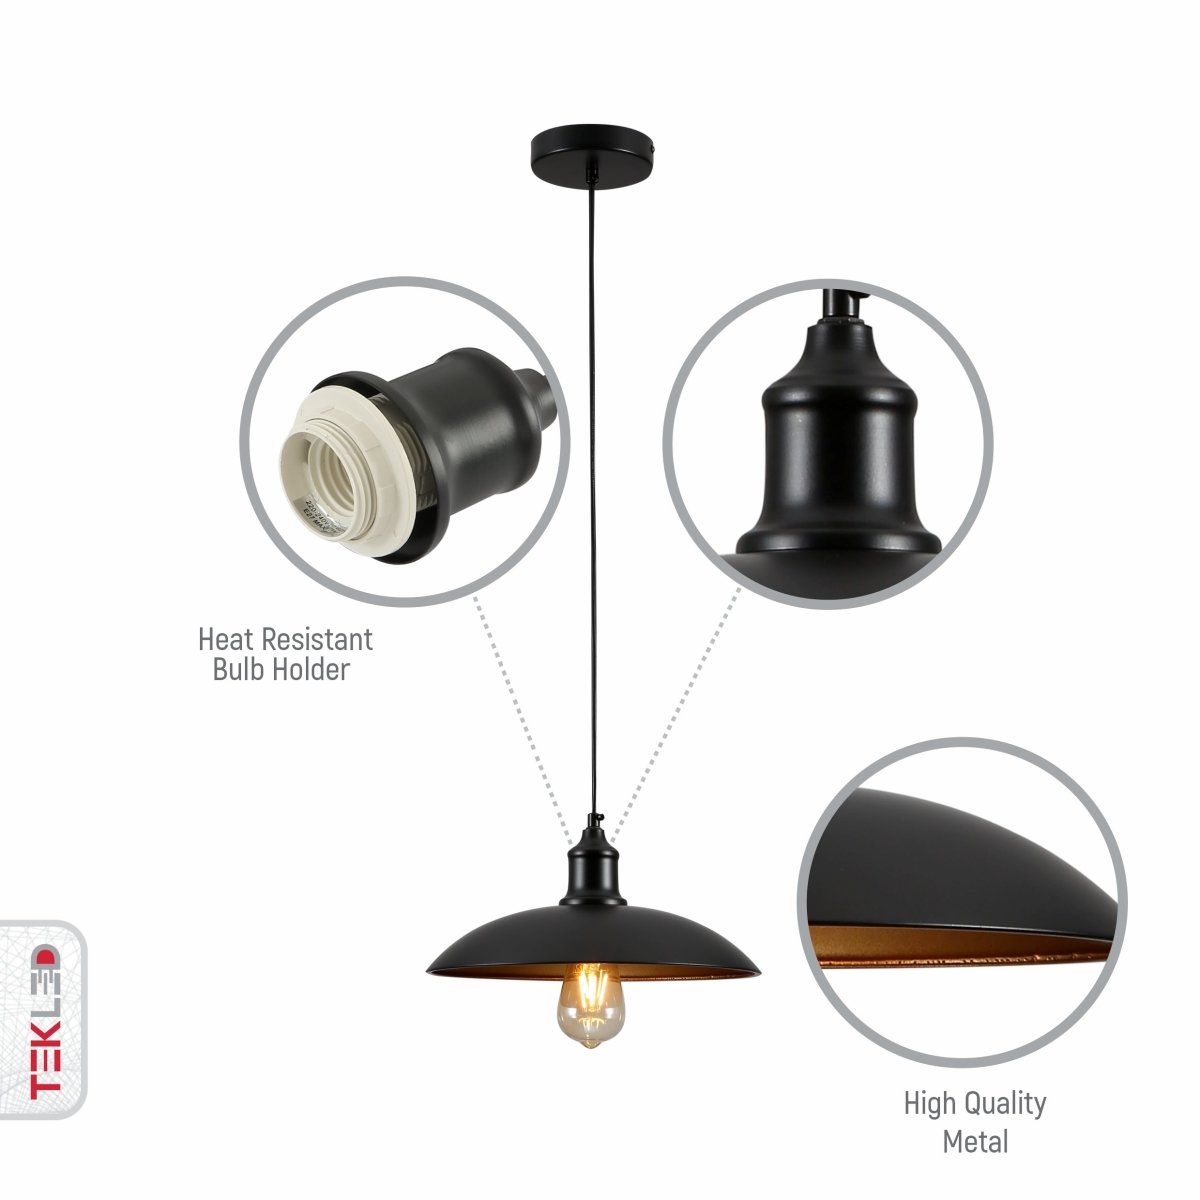 Close up shots of Black Flat Dome Industrial Metal Ceiling Pendant Light with E27 Fitting | TEKLED 150-18354